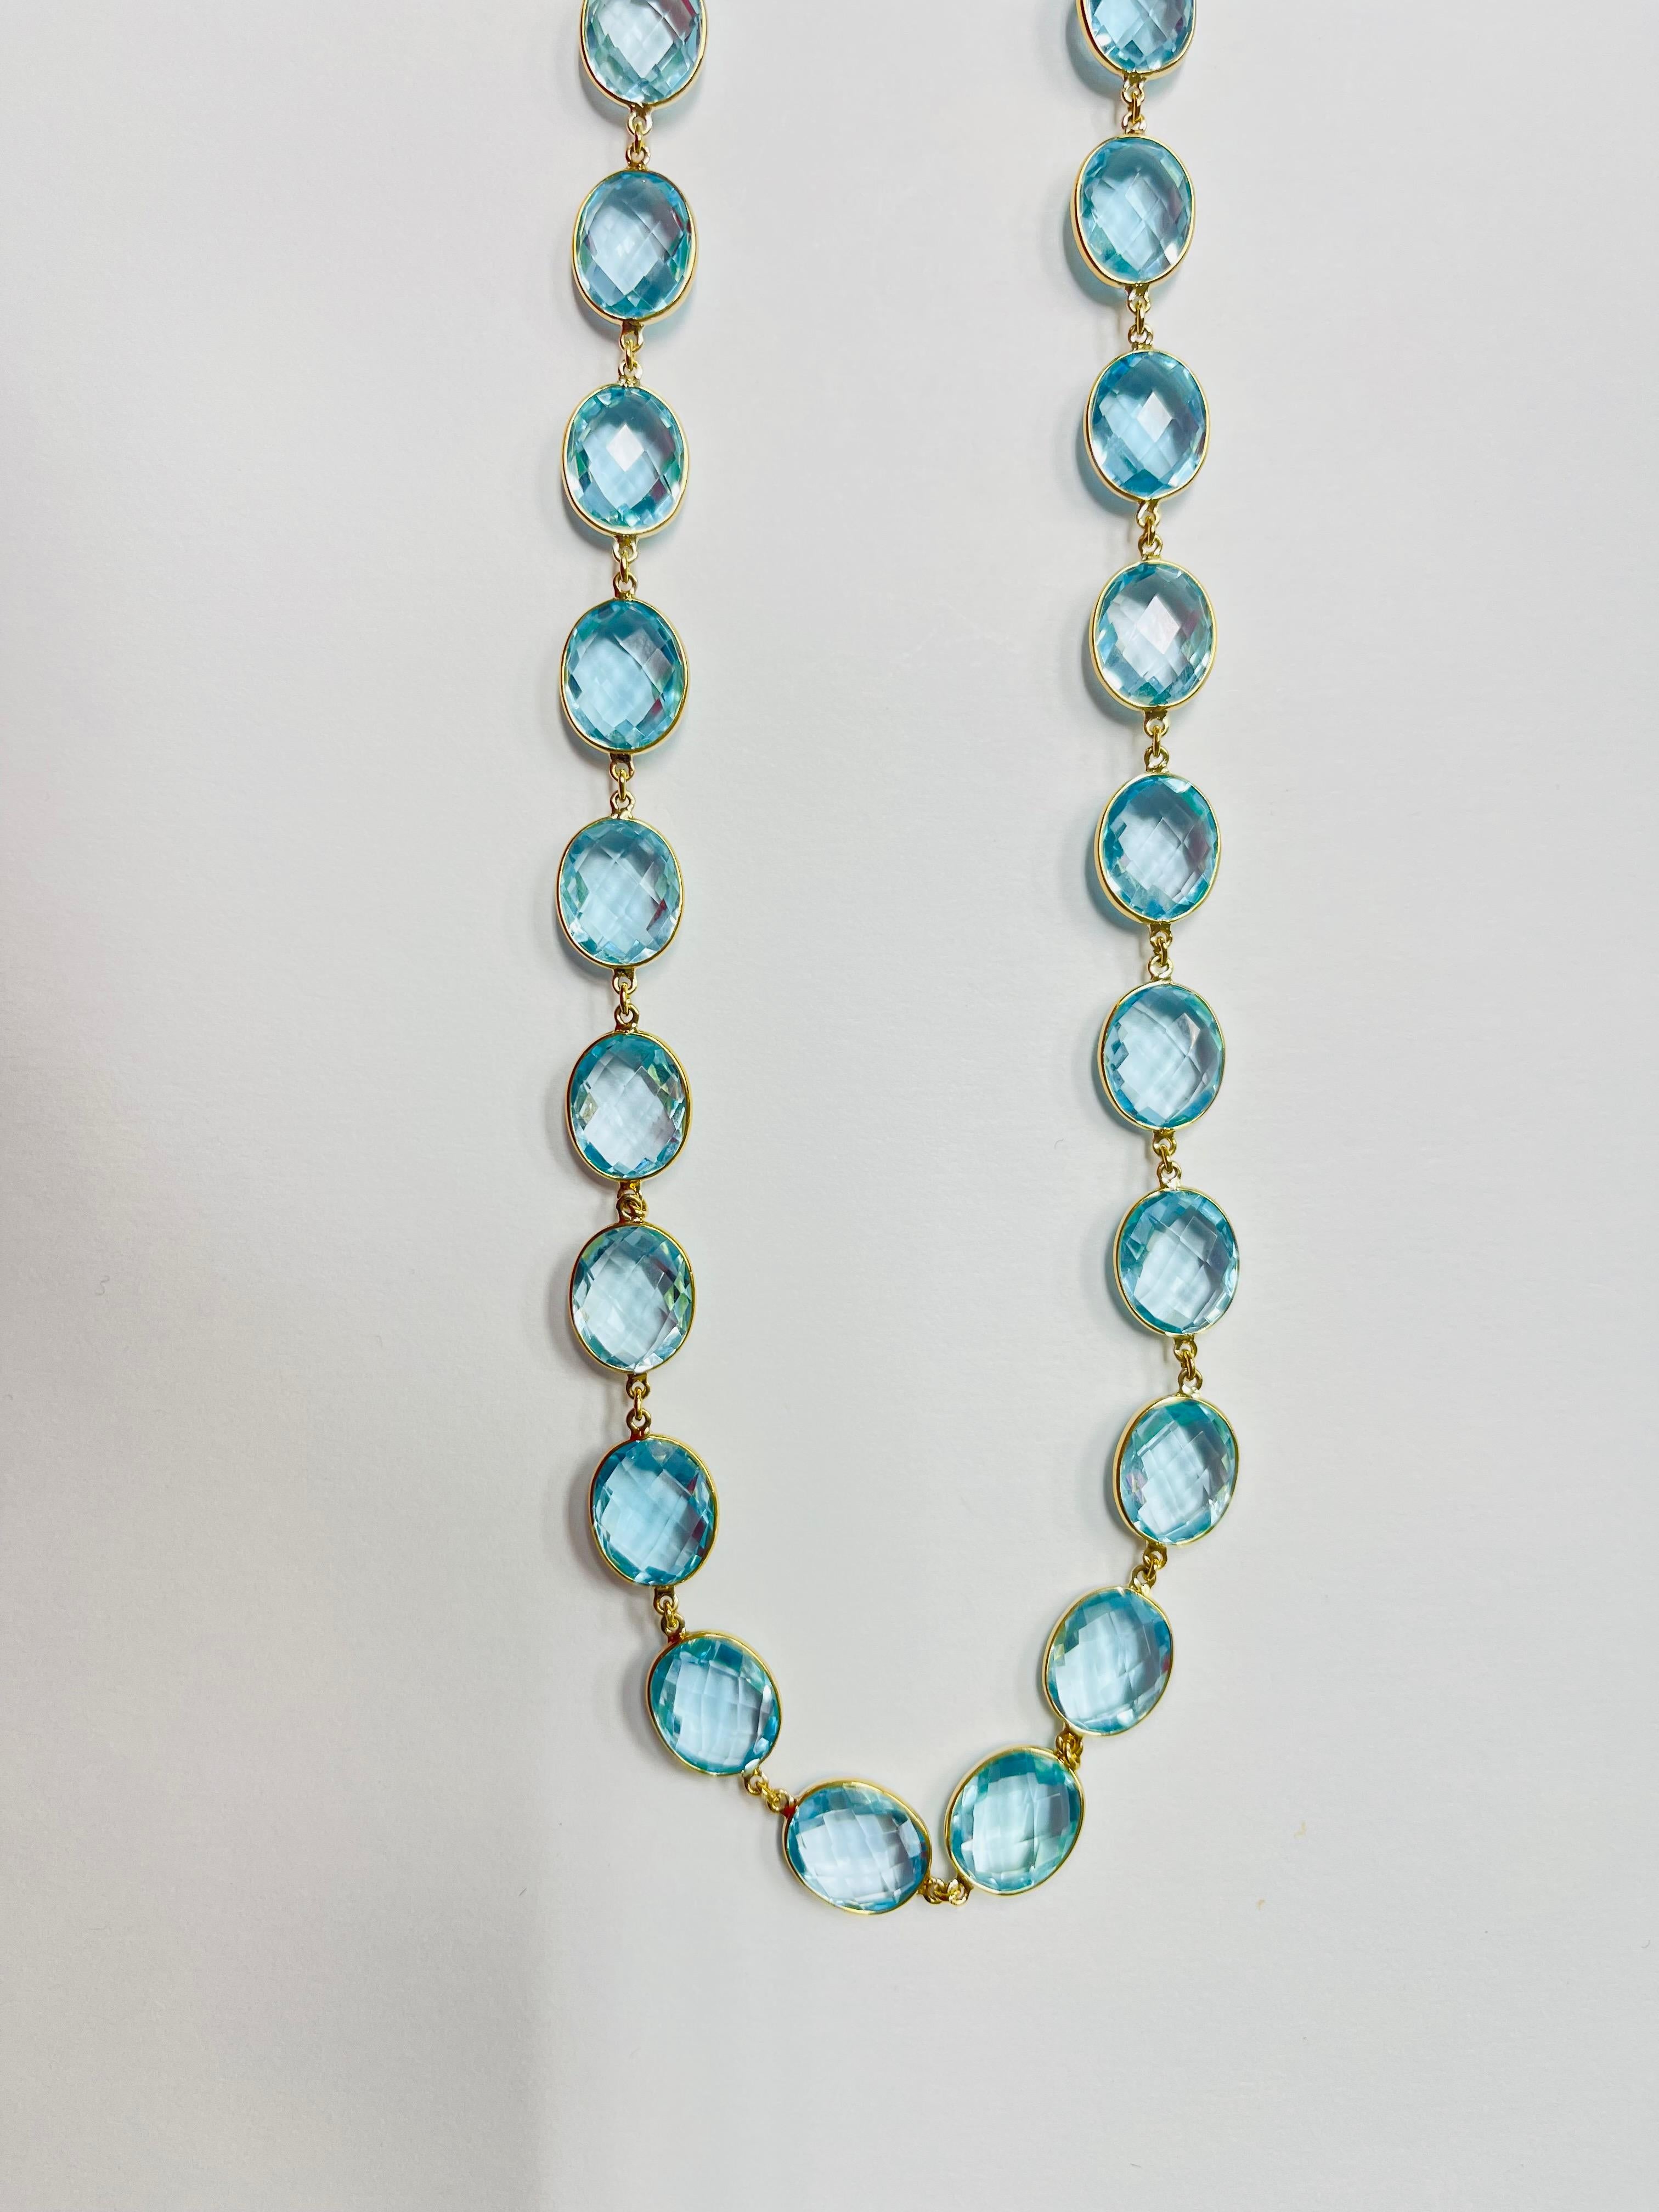 Contemporary 110 Carats Blue Topaz Necklace in 18K Yellow Gold